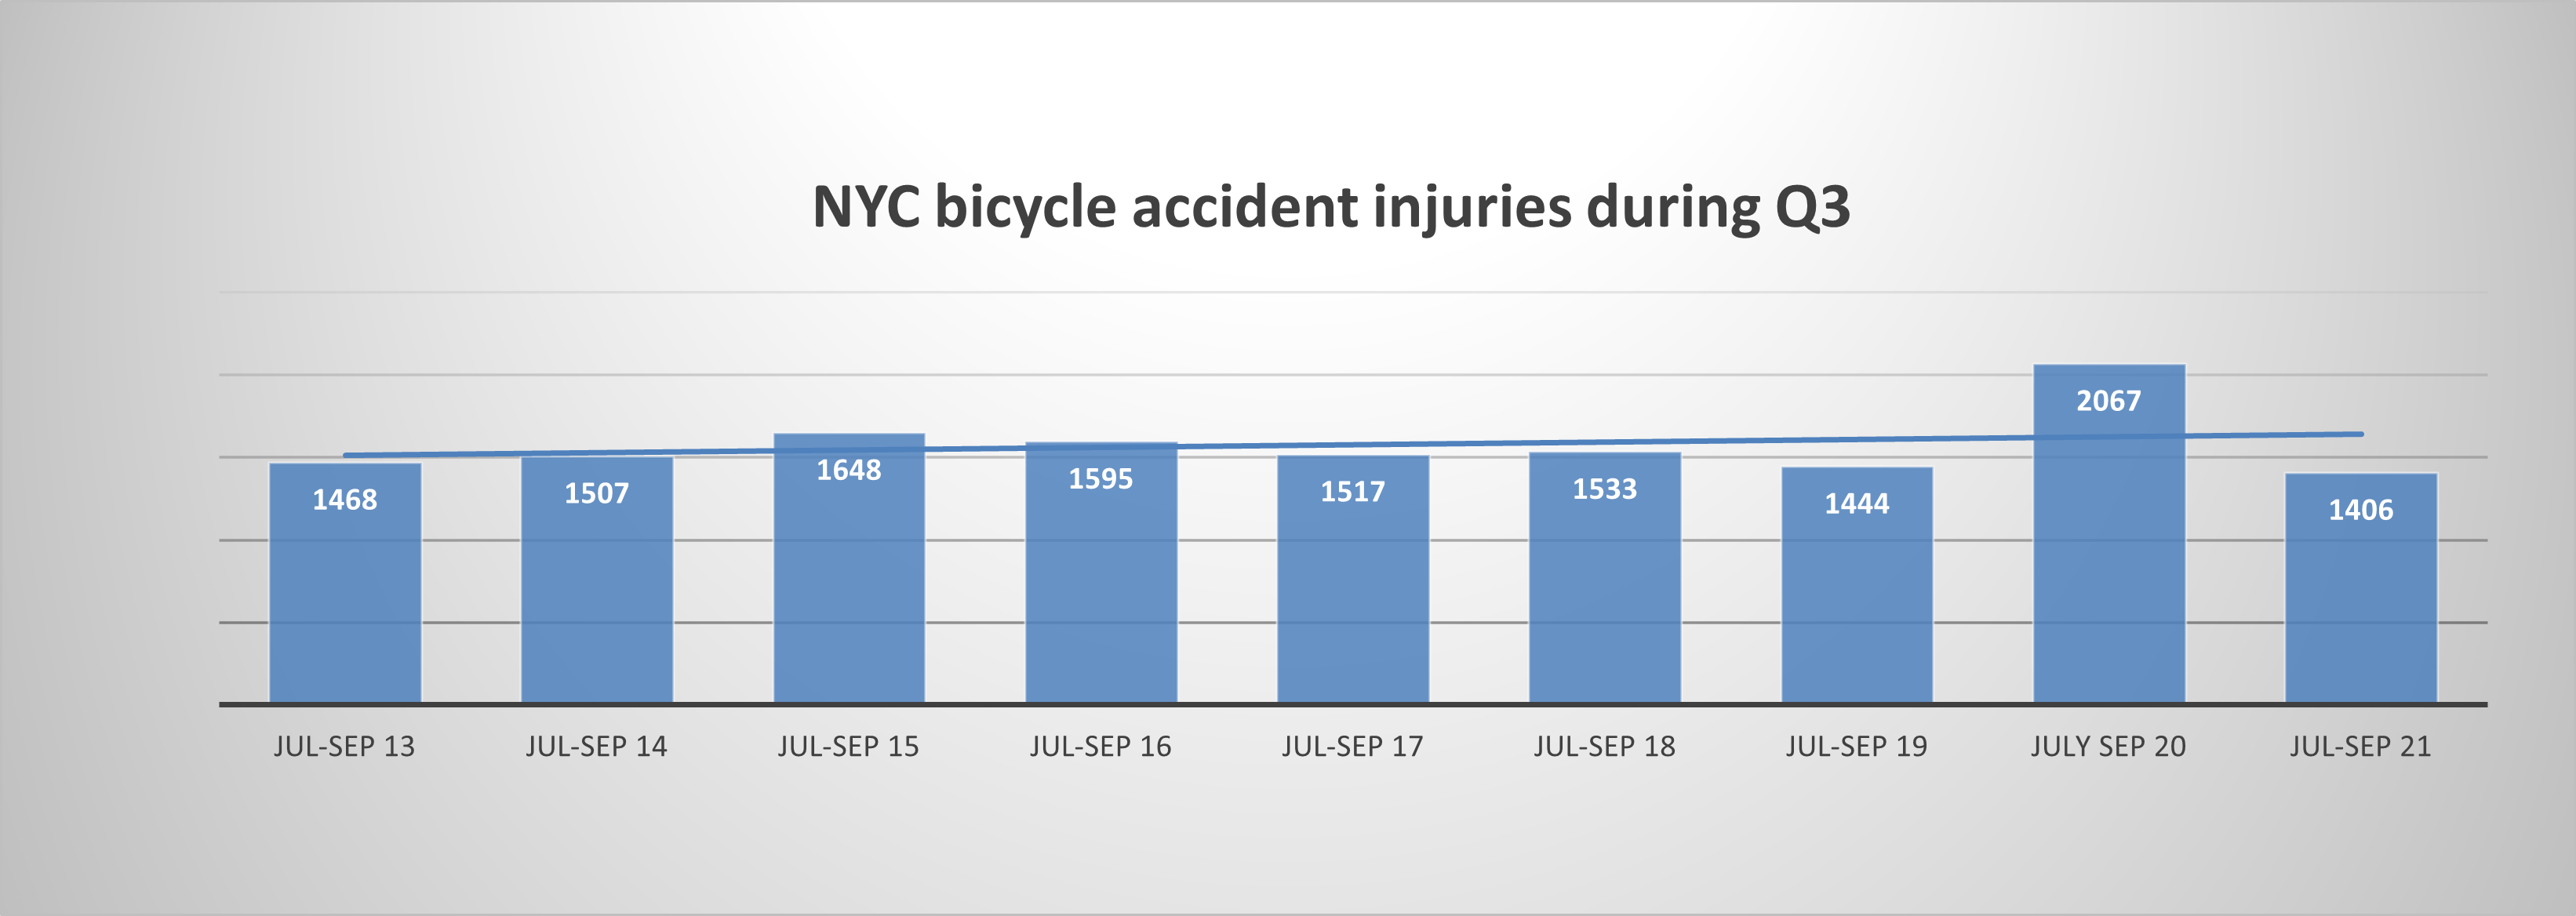 Bicycle Accident injuries NYC Q3